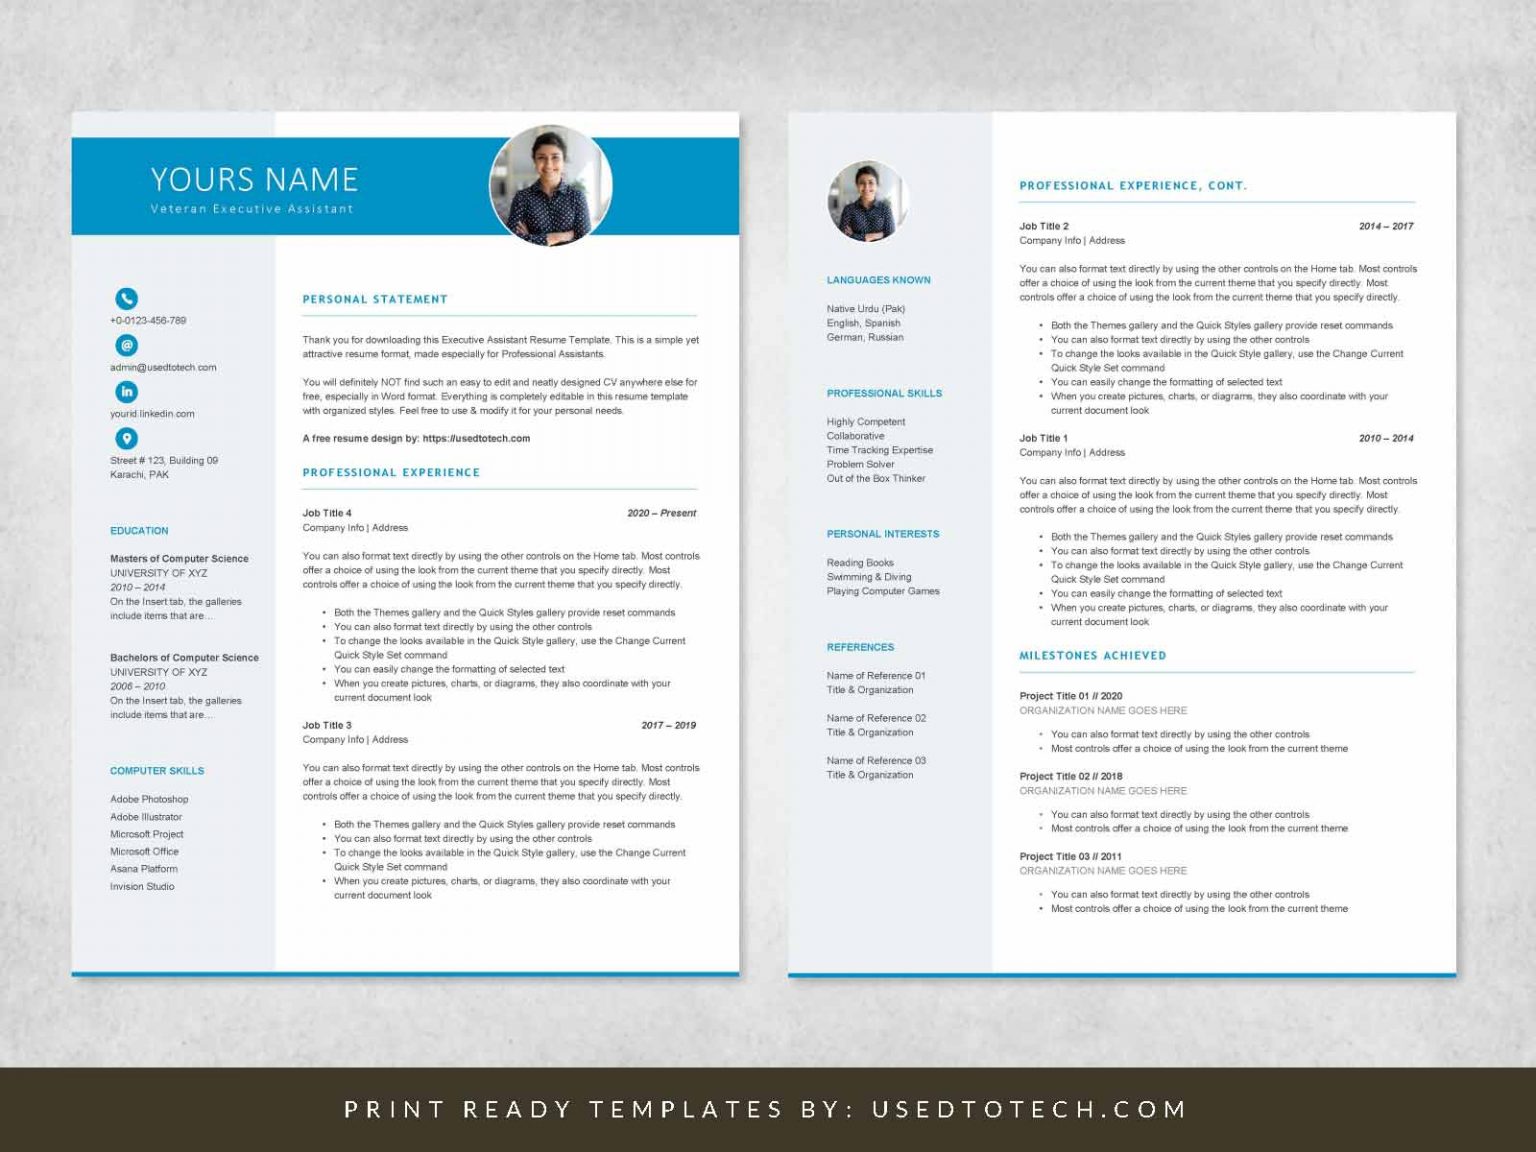 word-design-for-executive-assistant-resume